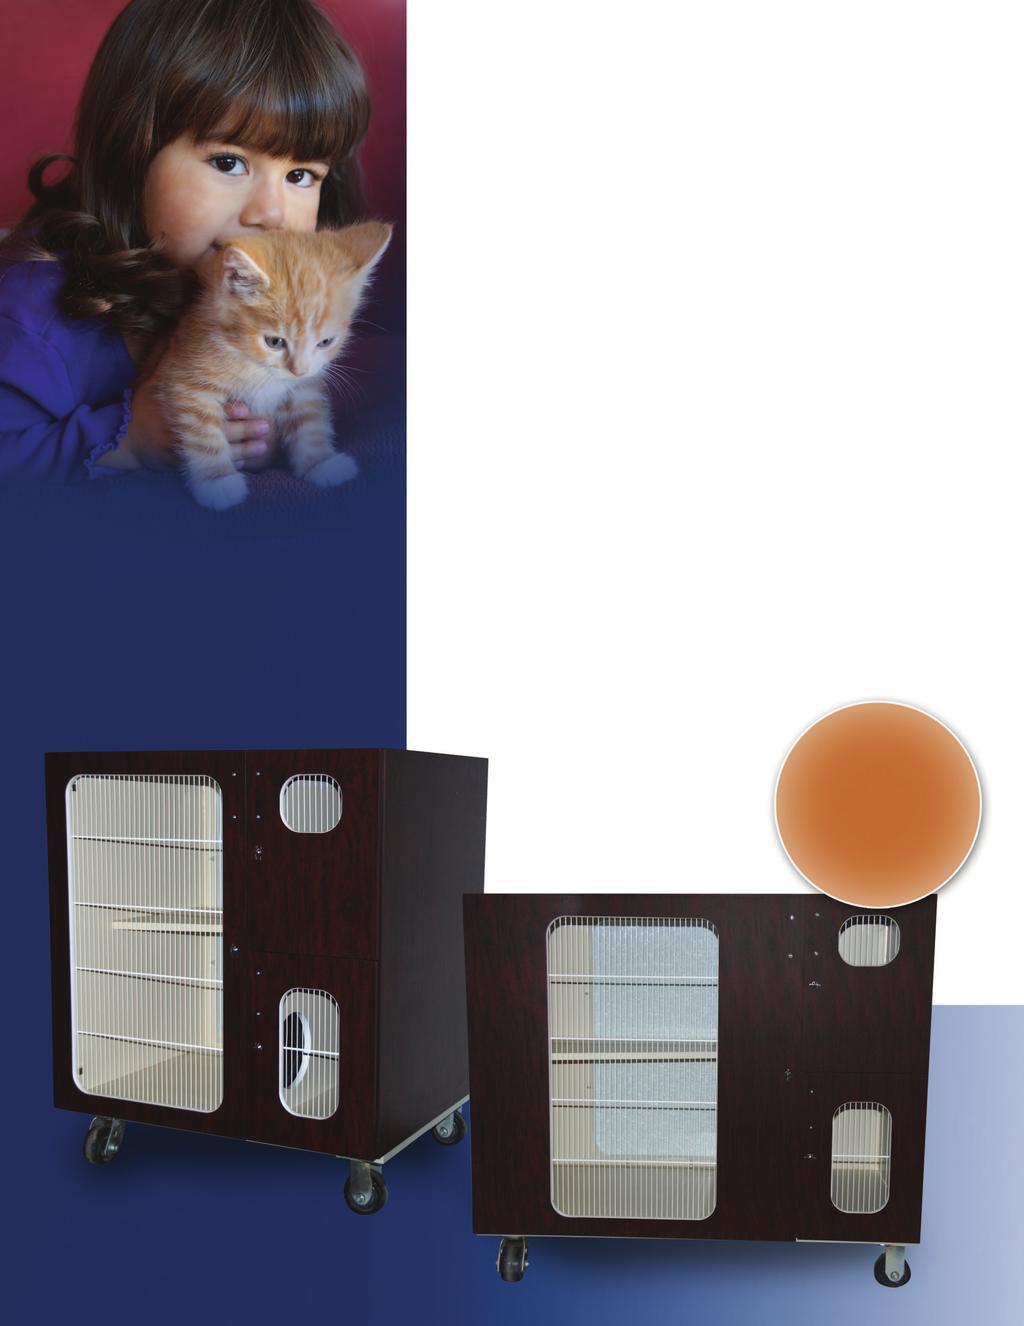 Shelter Cat Condos Mason Shelter Cat Condos are specifically designed for animal shelters based on the Association of Shelter Veterinarians guidelines for feline housing.